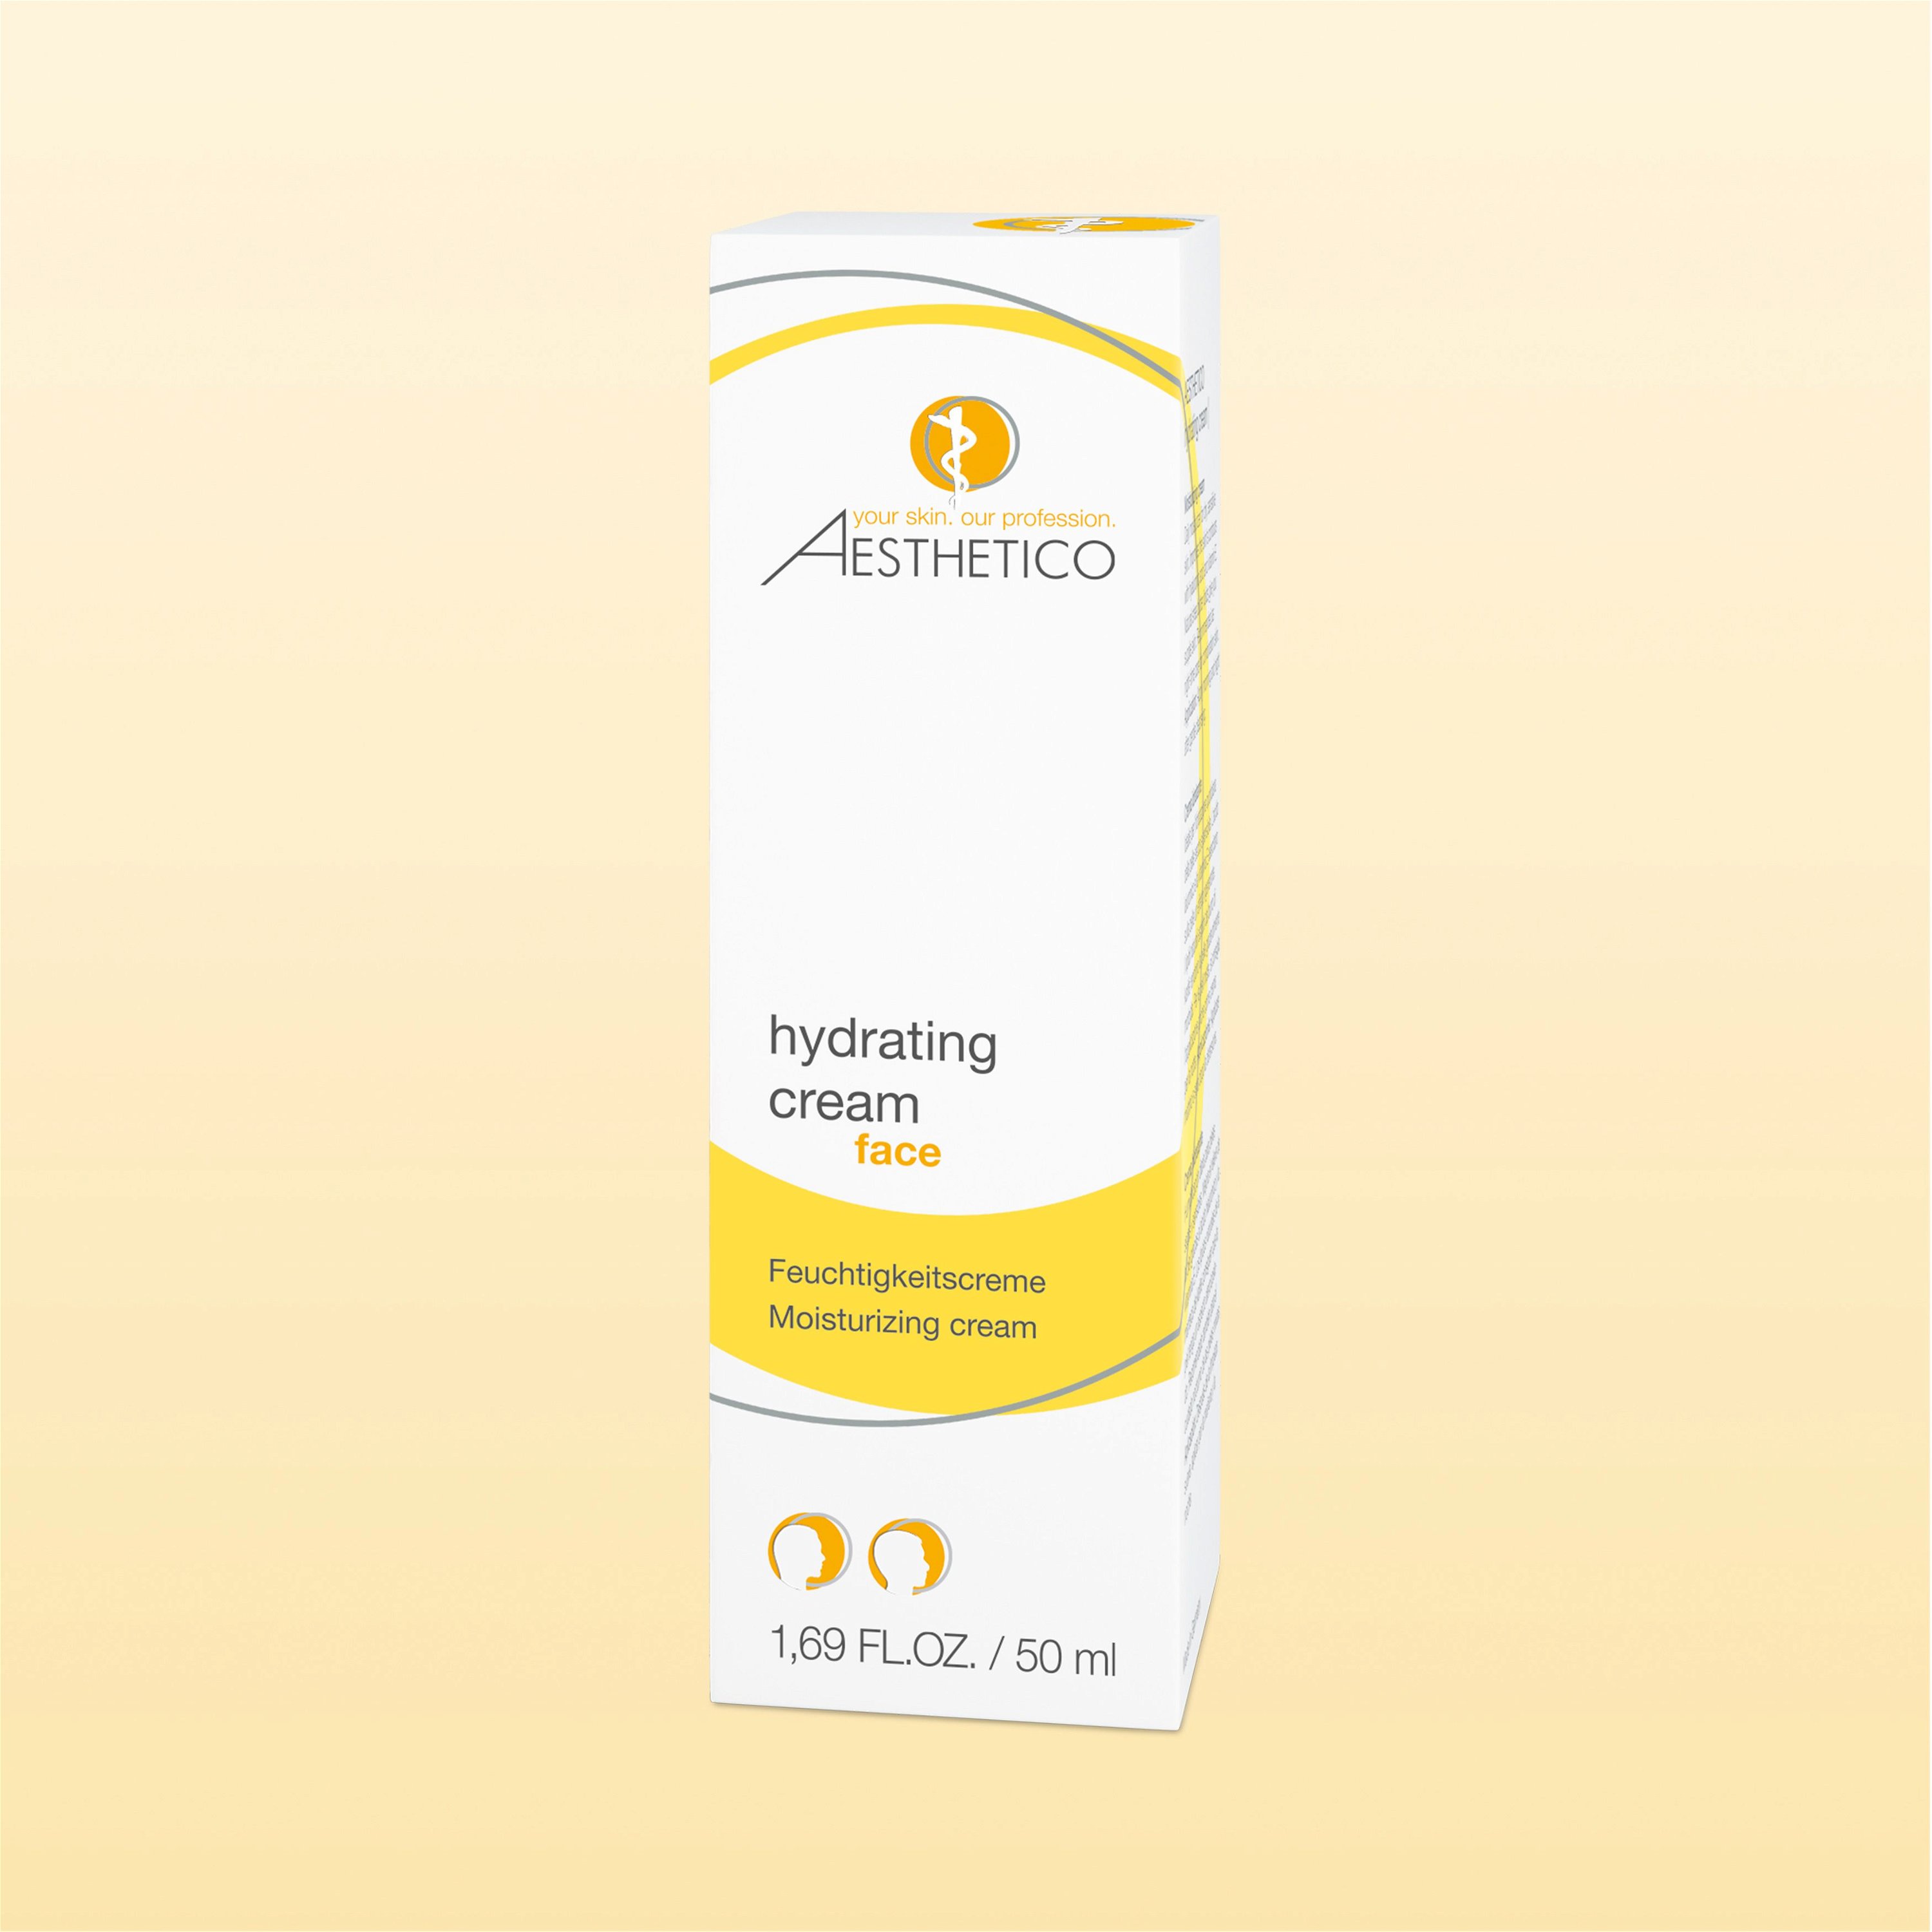 Umverpackung AESTHETICO hydrating crem, 50 ml